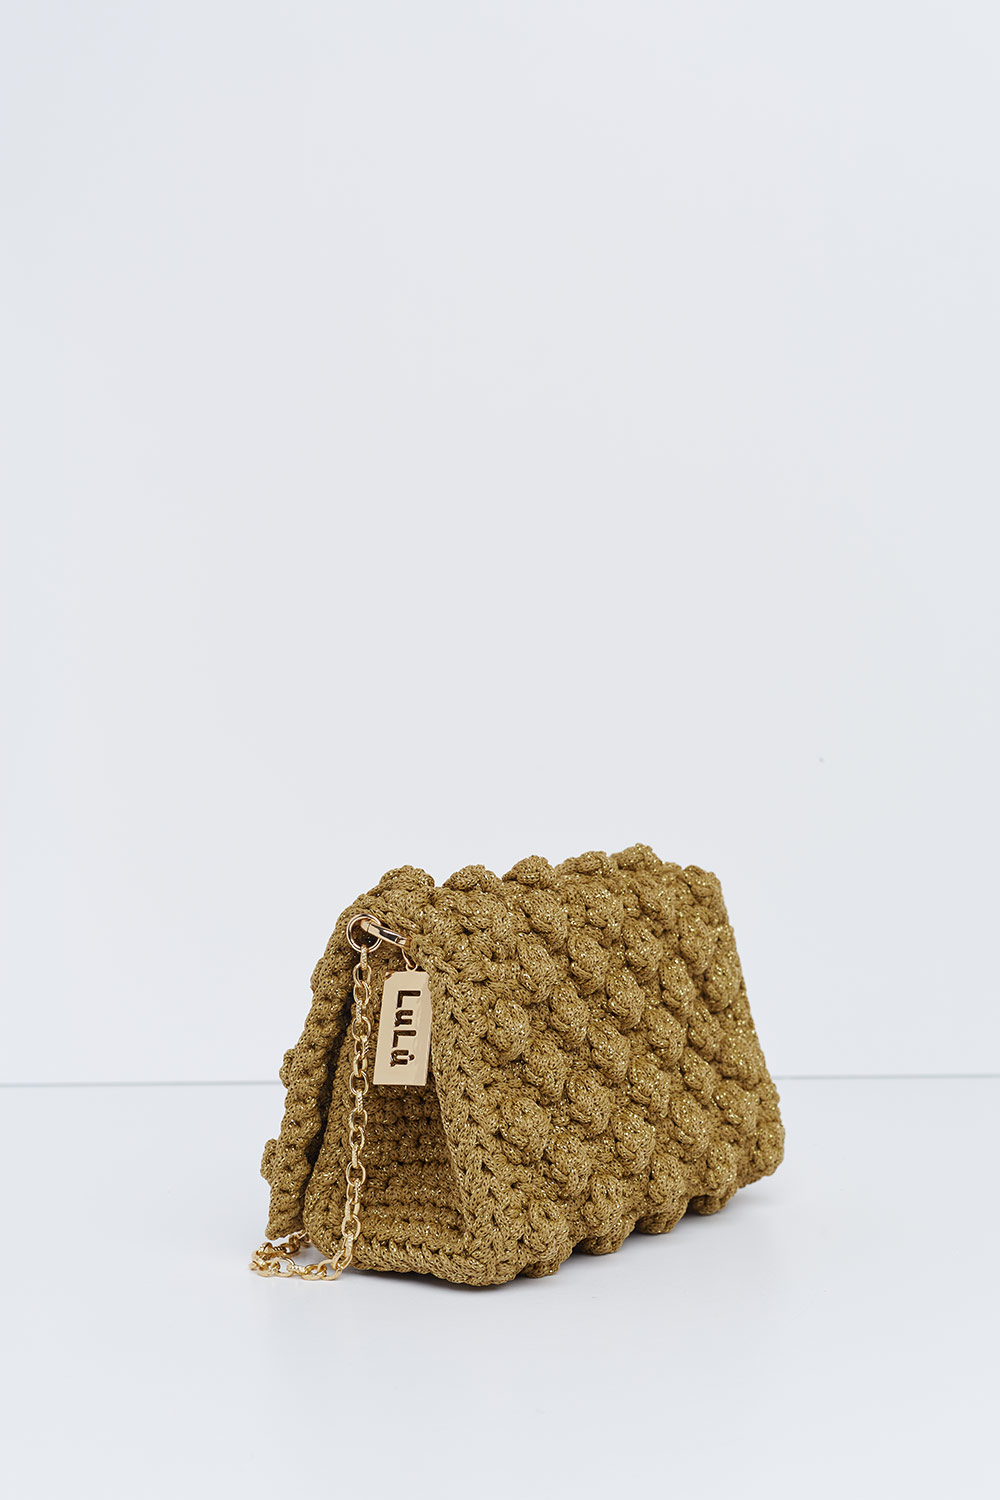 101 / XS Mini bag with bubbles in gold